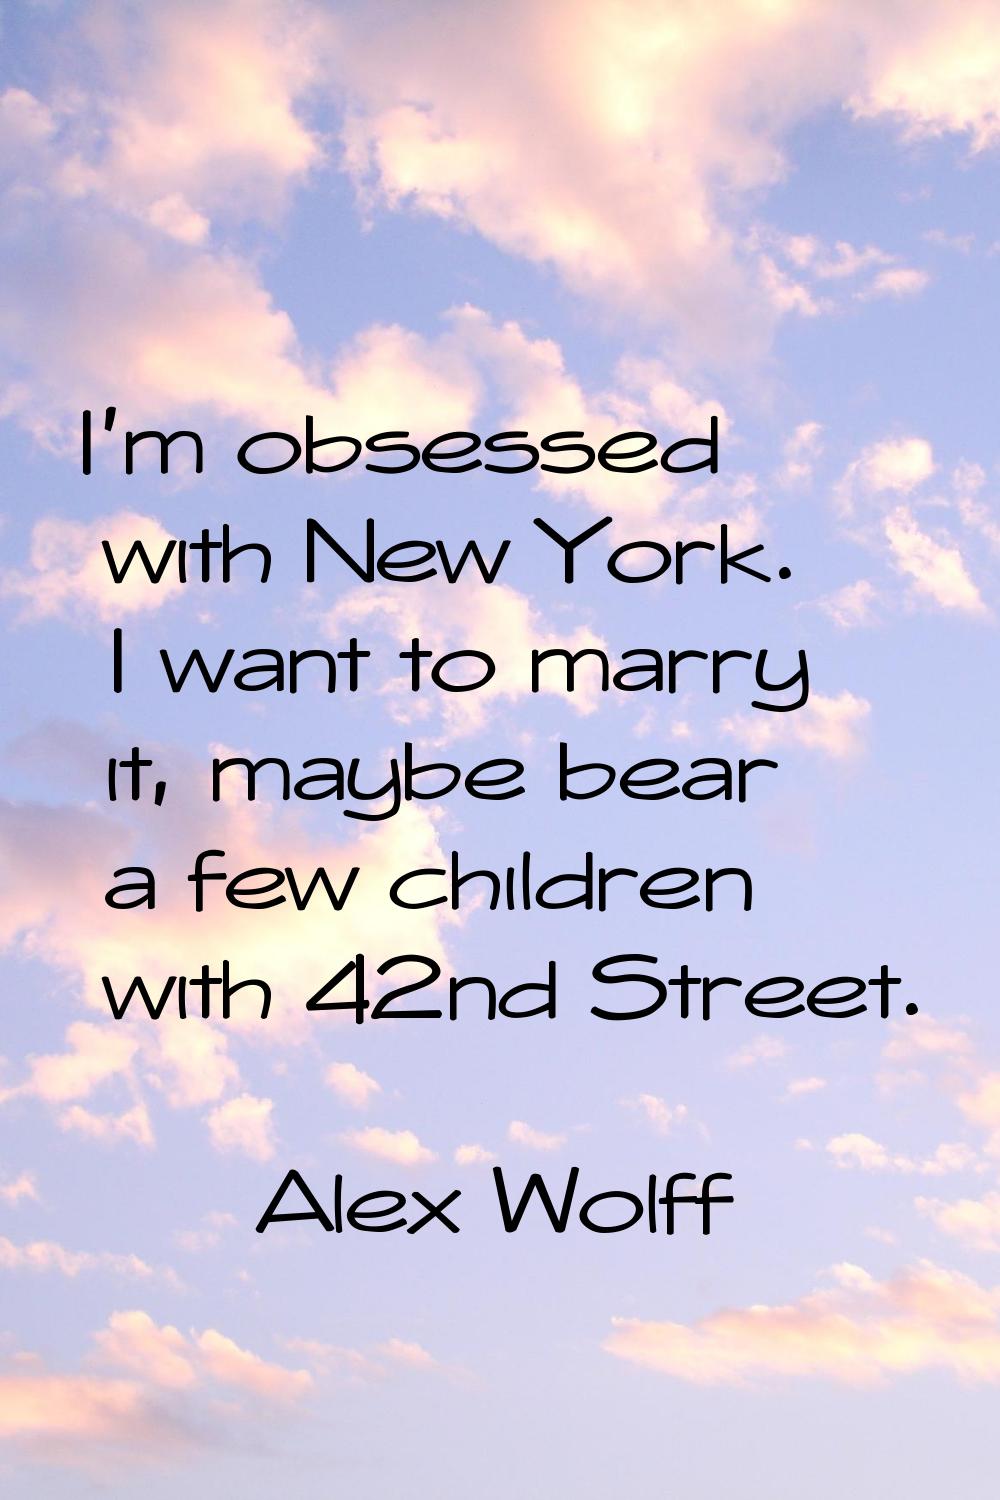 I'm obsessed with New York. I want to marry it, maybe bear a few children with 42nd Street.